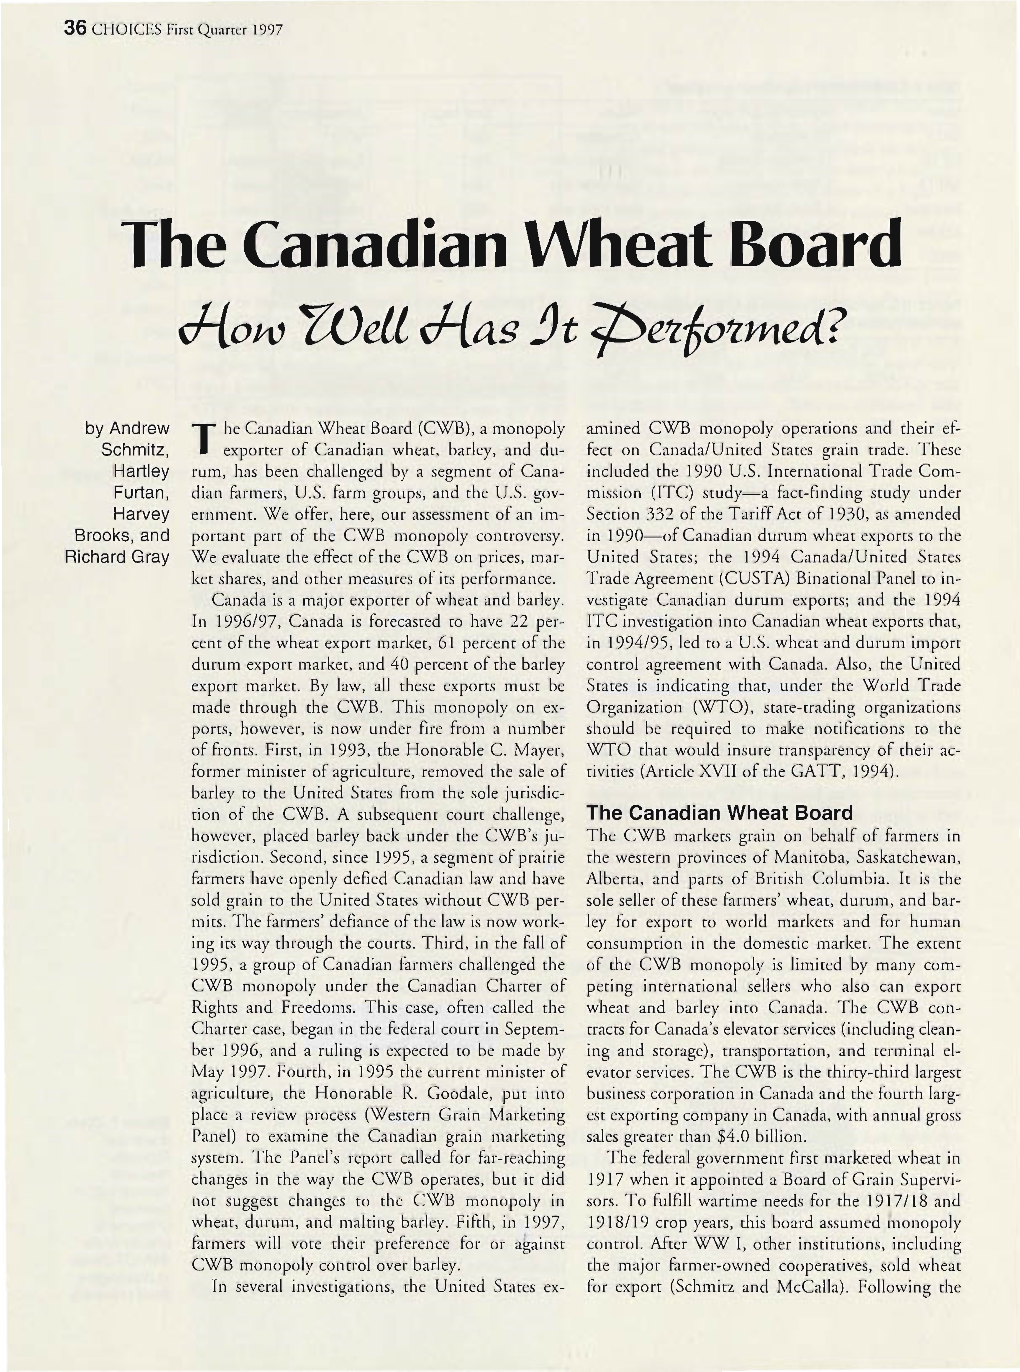 The Canadian Wheat Board